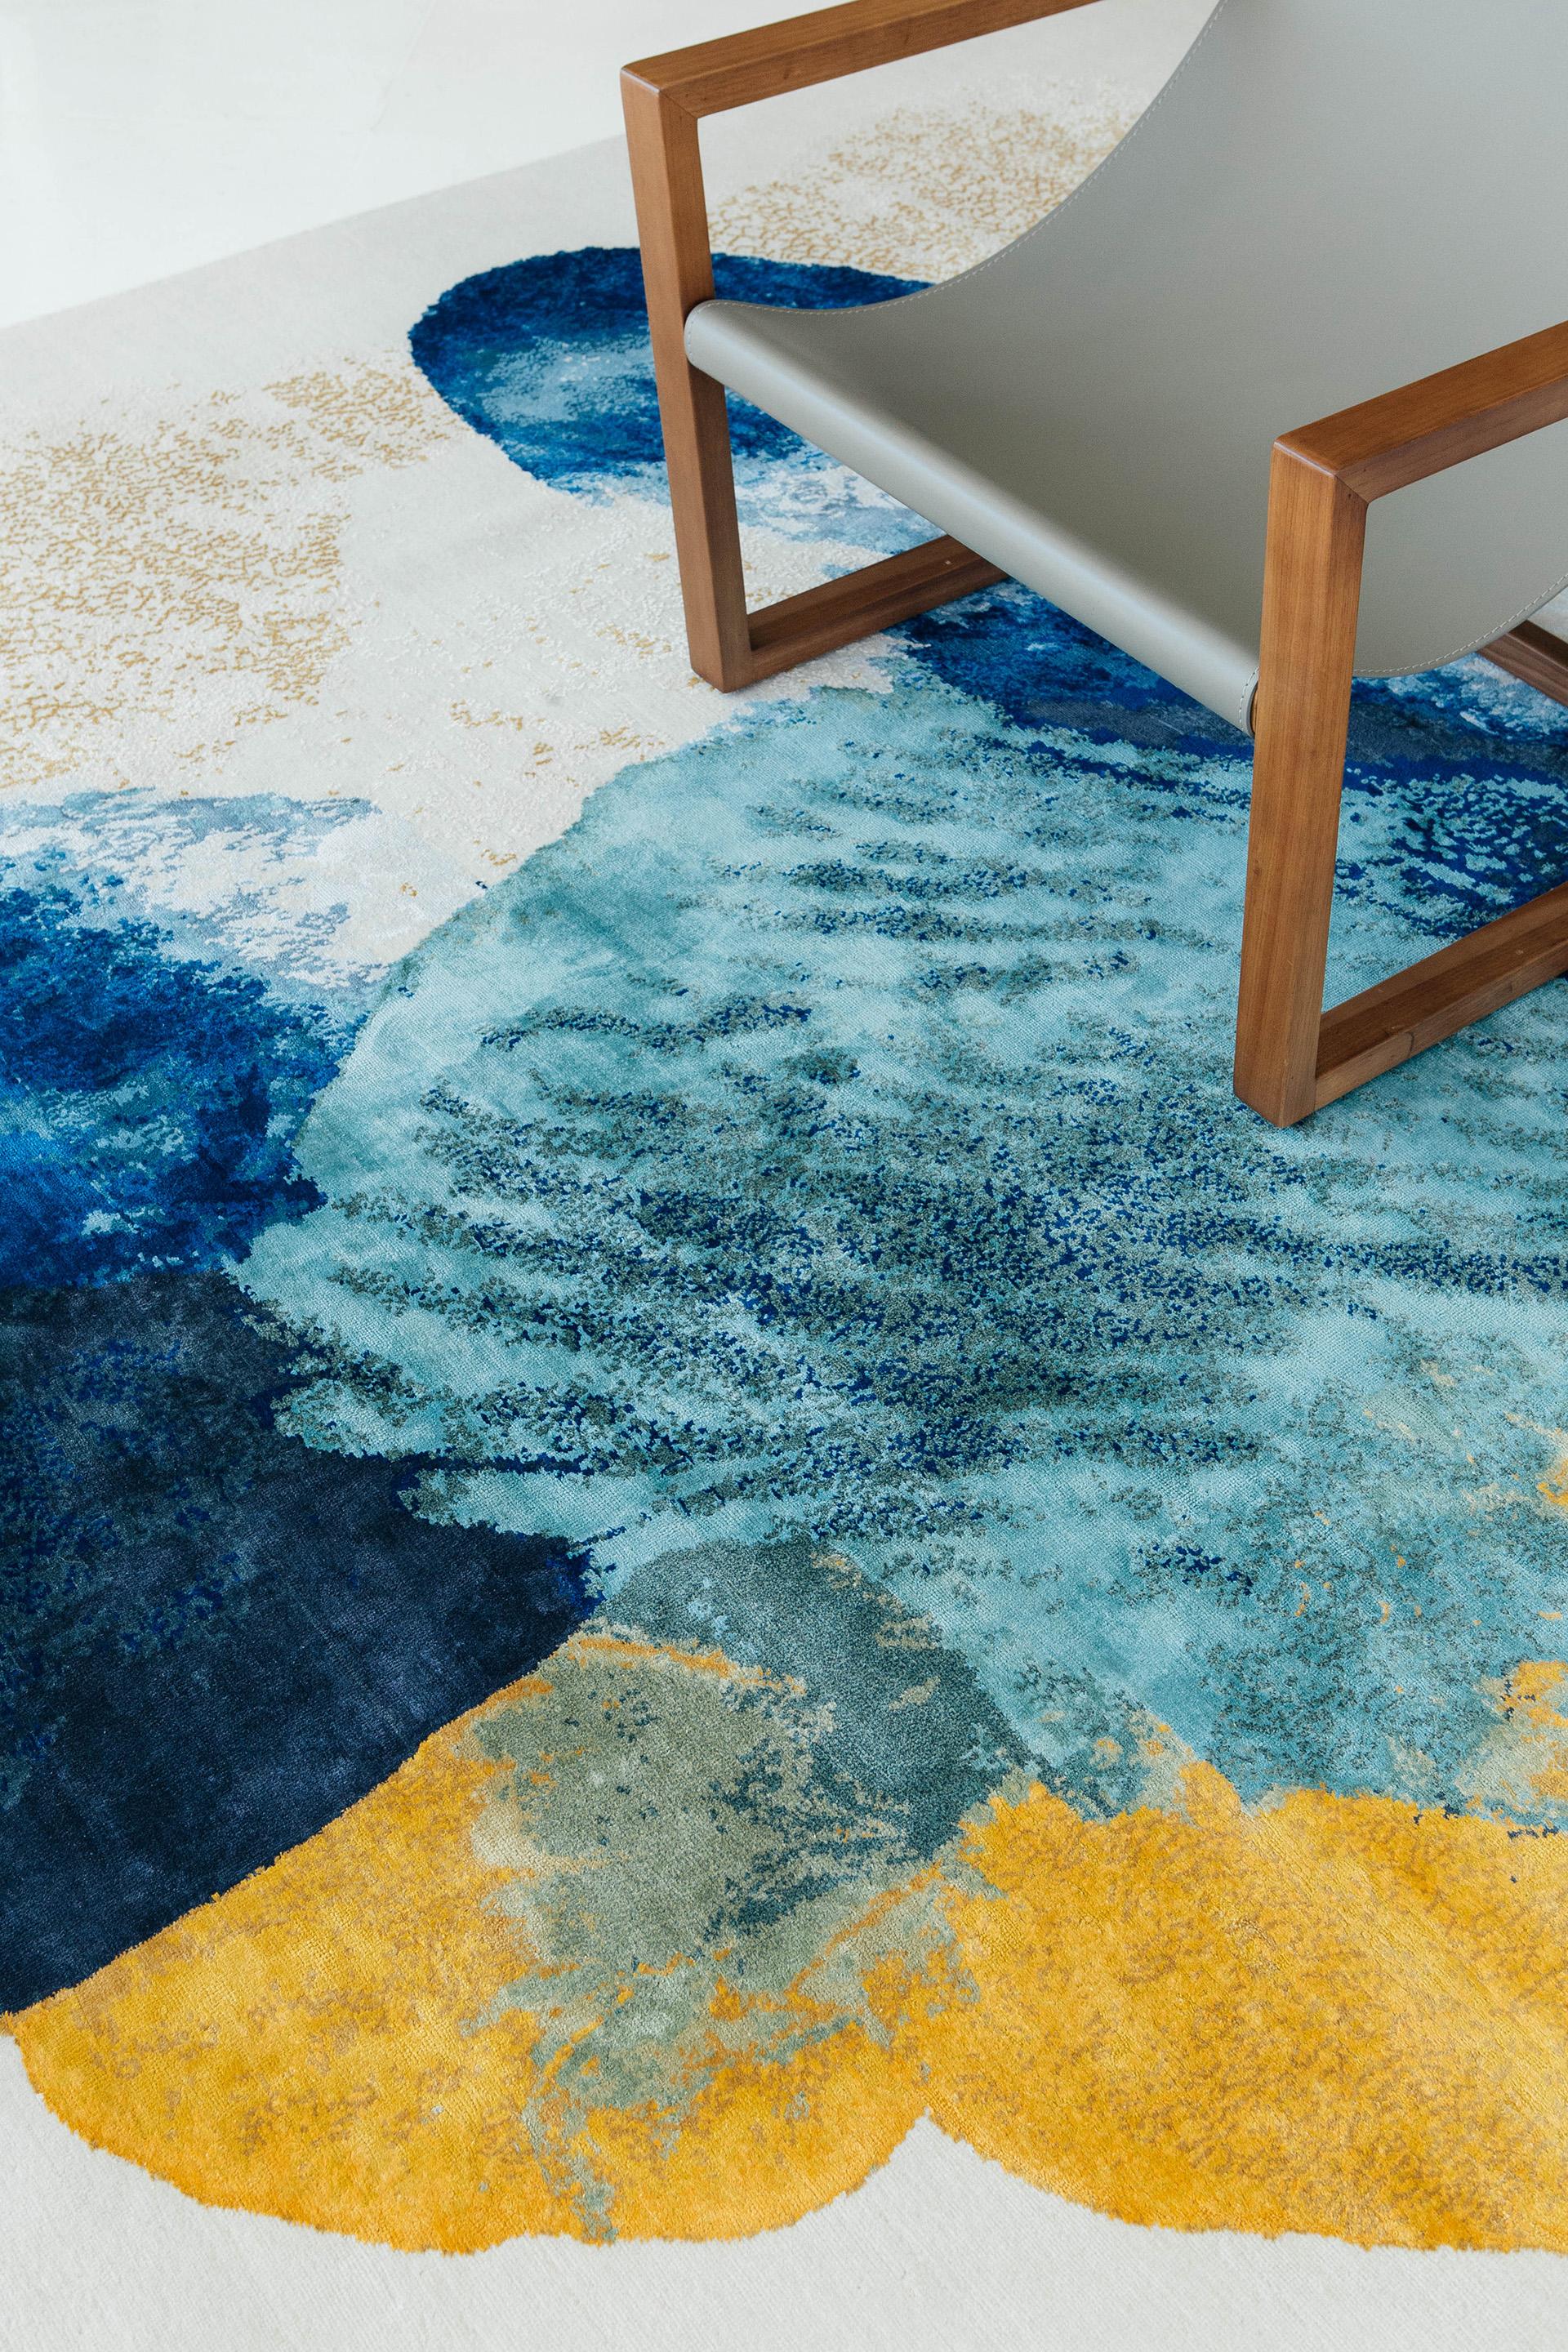 The Bisous Collection by Citizen Artist

The eight carpets in the collection are inspired by the ways in which human beings express themselves: language, poetry, art, and architecture. Bisous is intended as a celebration--an exultation--shared